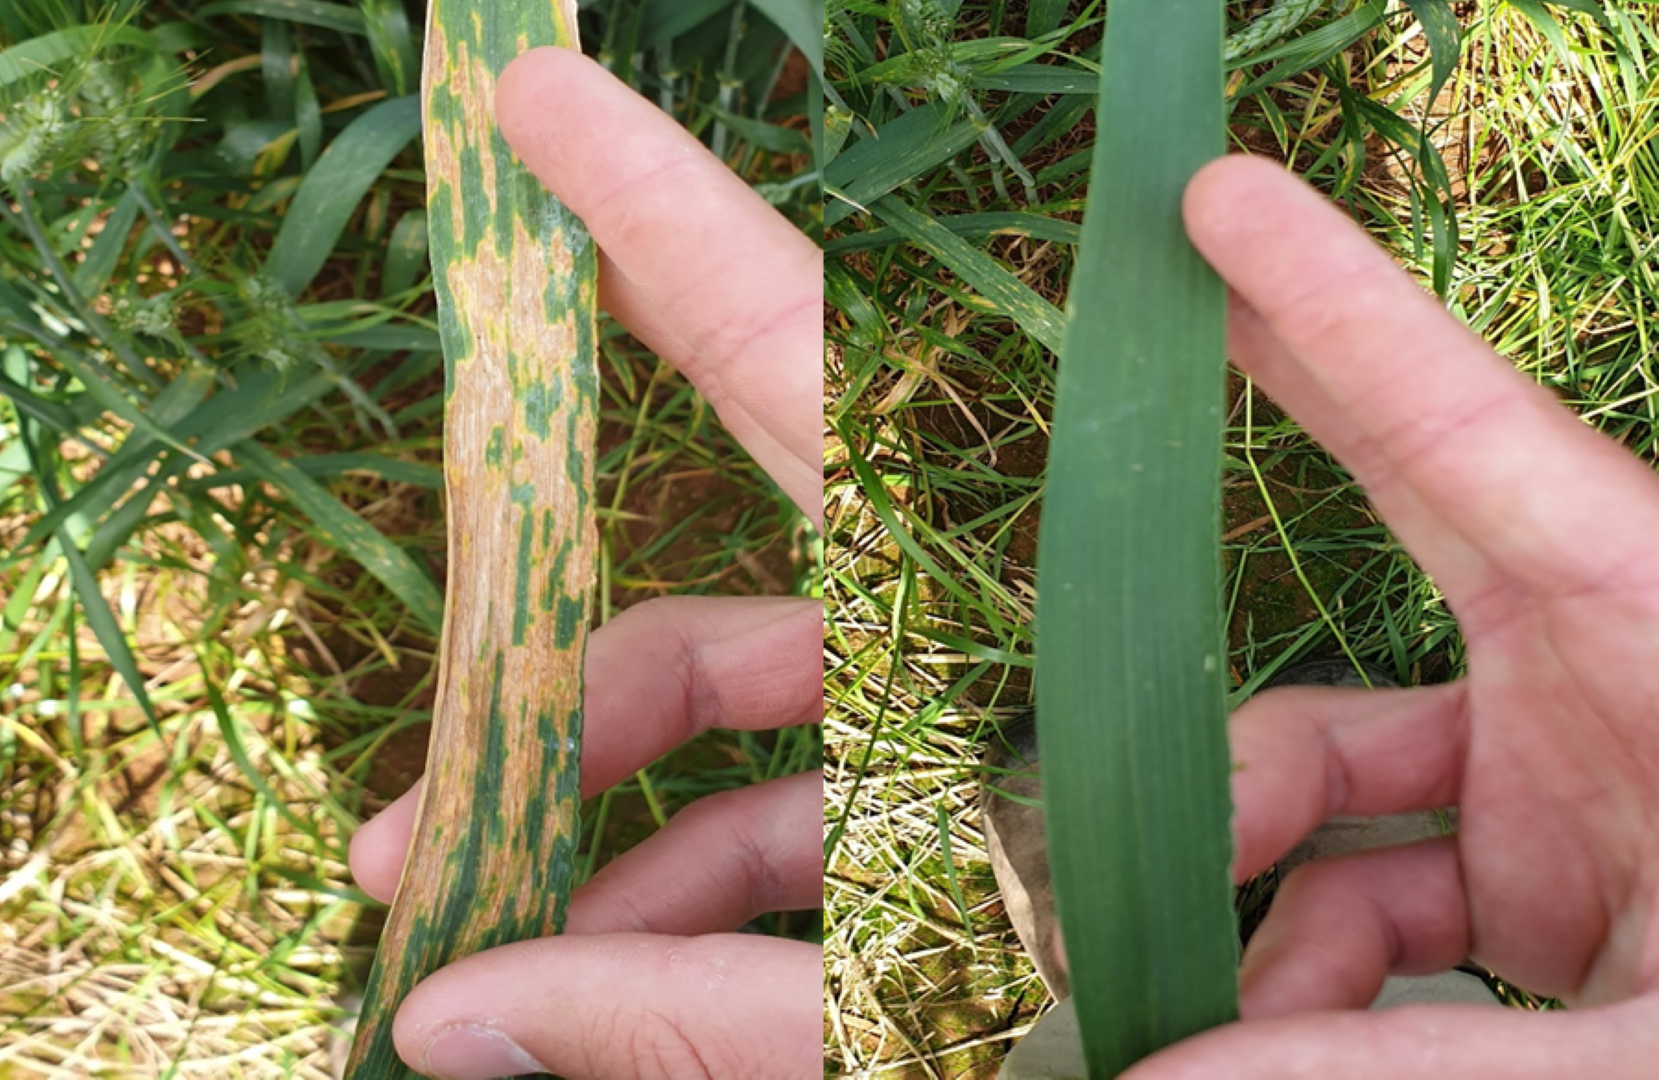 Hart; evidence of septoria infection